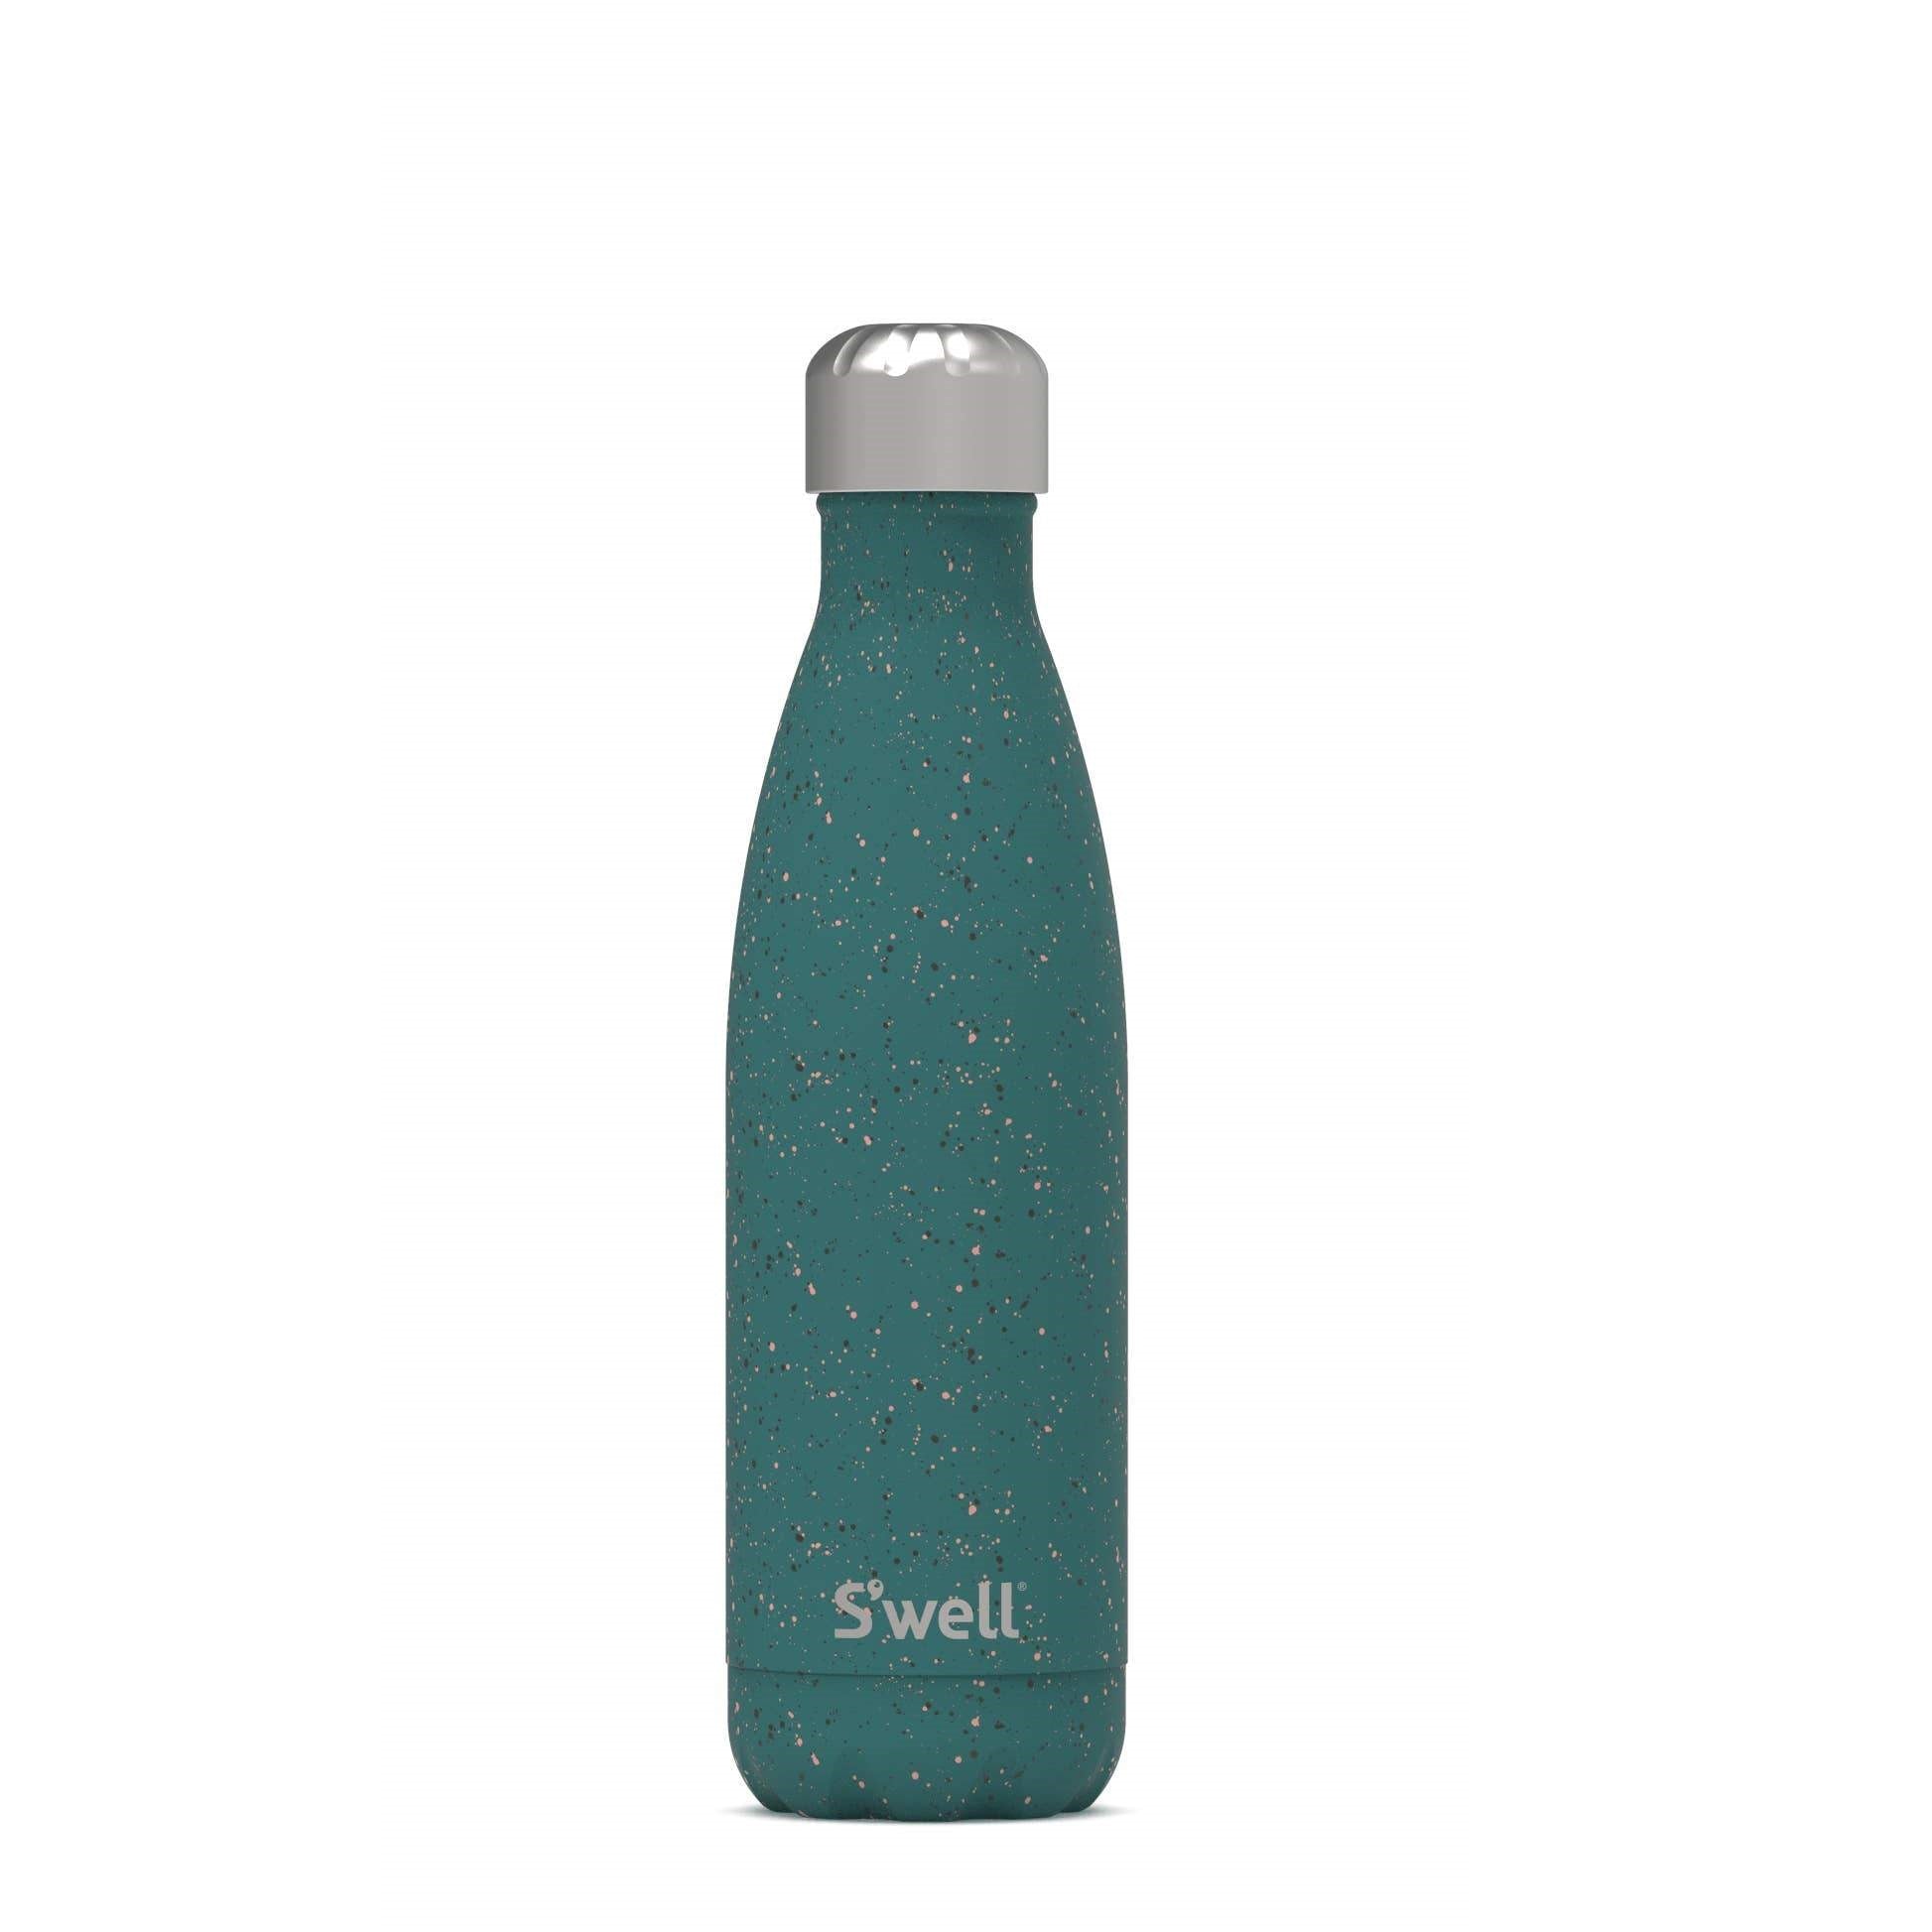 17oz Swell Speckled Earth